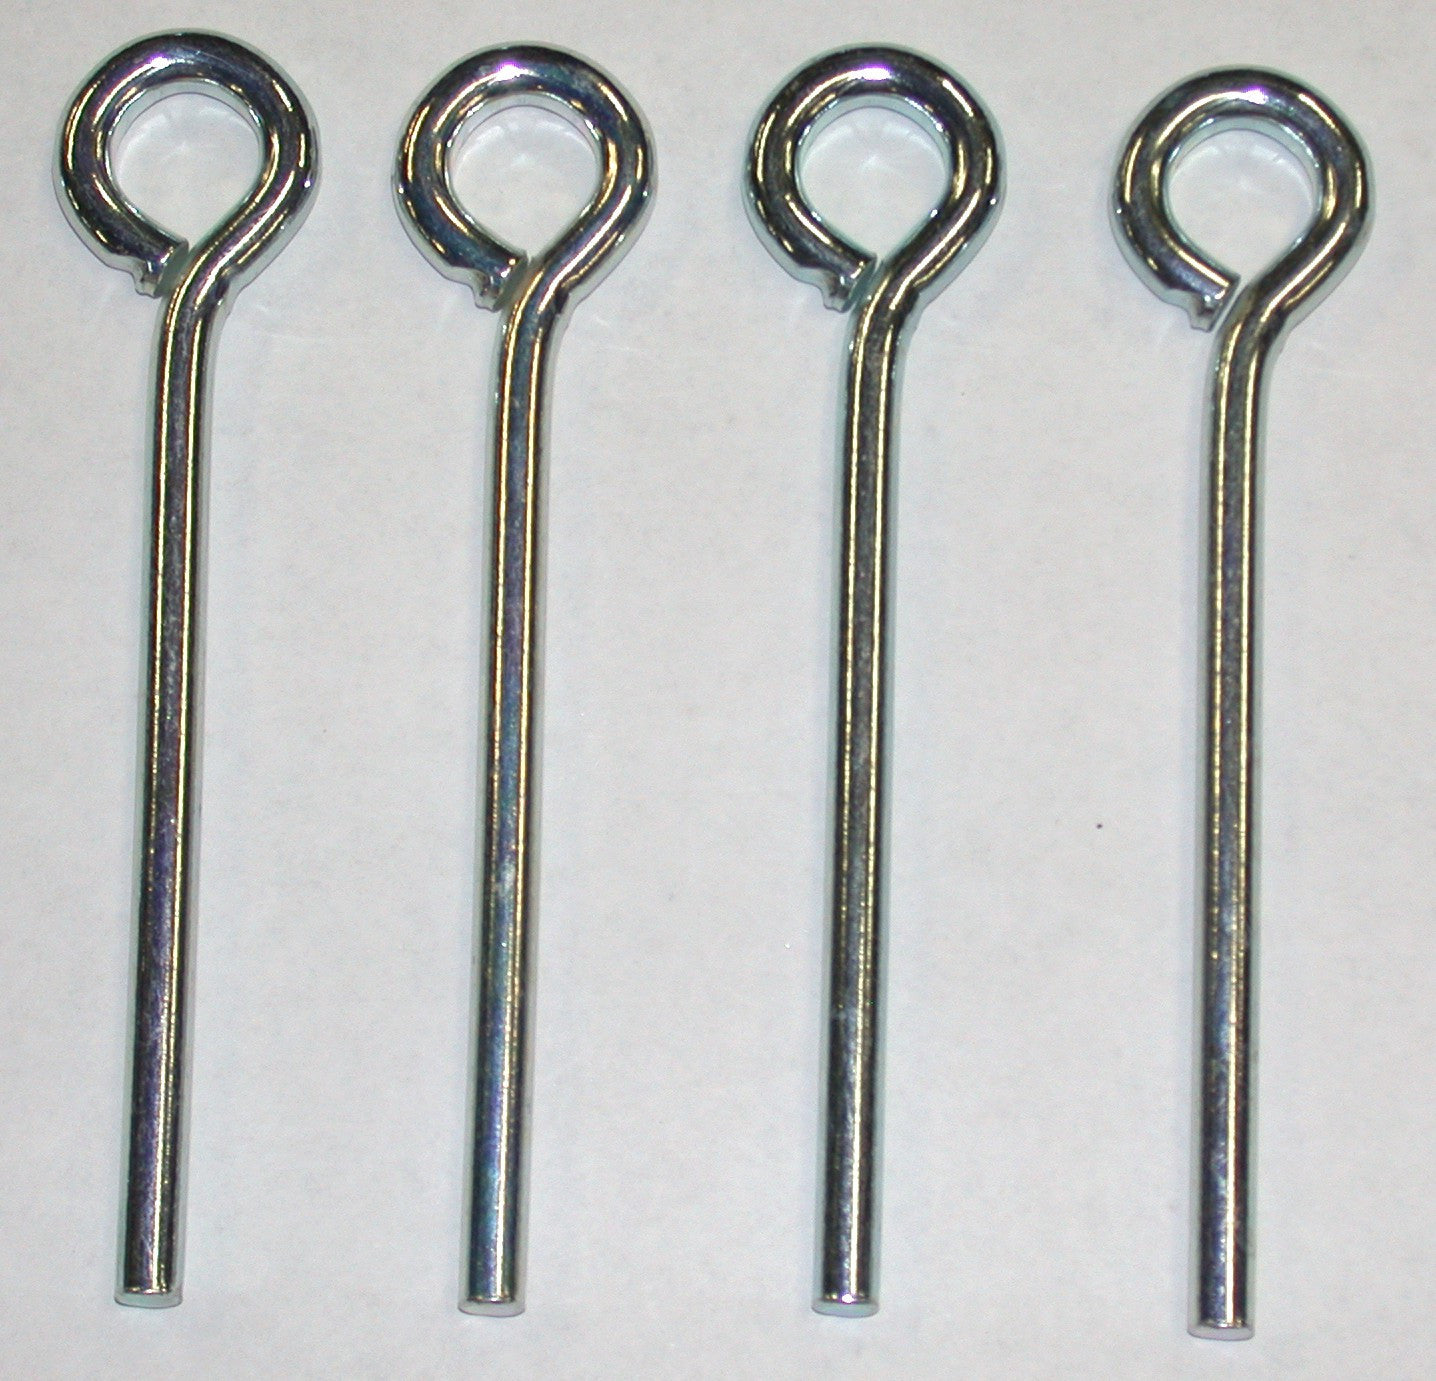 5SC-four zinc plated, 5-inch long,1/4 round steel pegs, closed eye loop